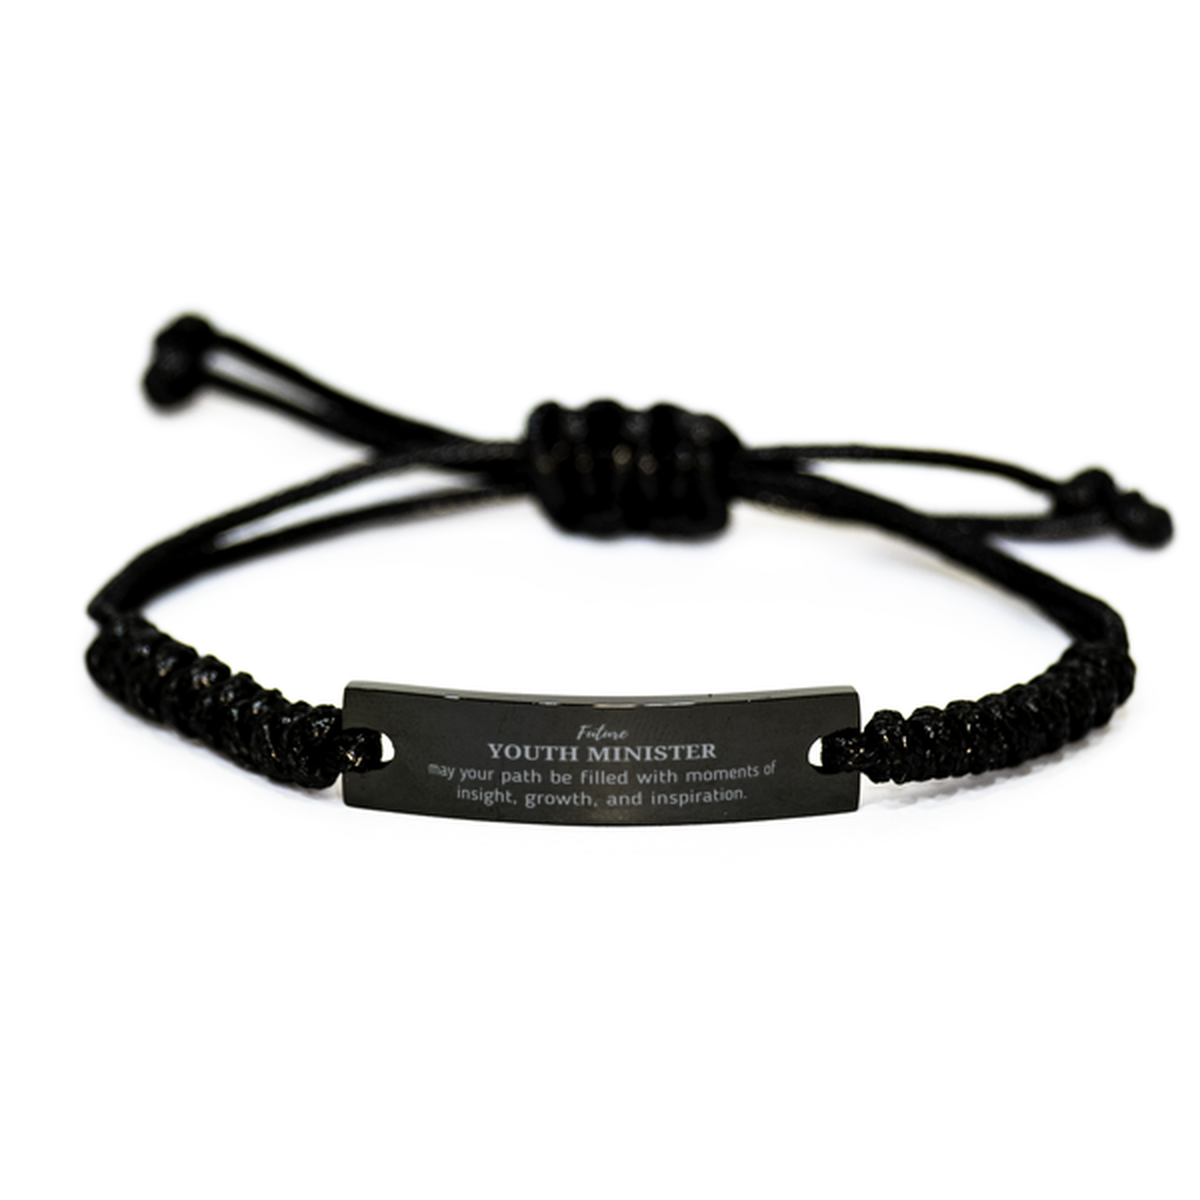 Future Youth Minister Gifts, May your path be filled with moments of insight, Graduation Gifts for New Youth Minister, Christmas Unique Black Rope Bracelet For Men, Women, Friends